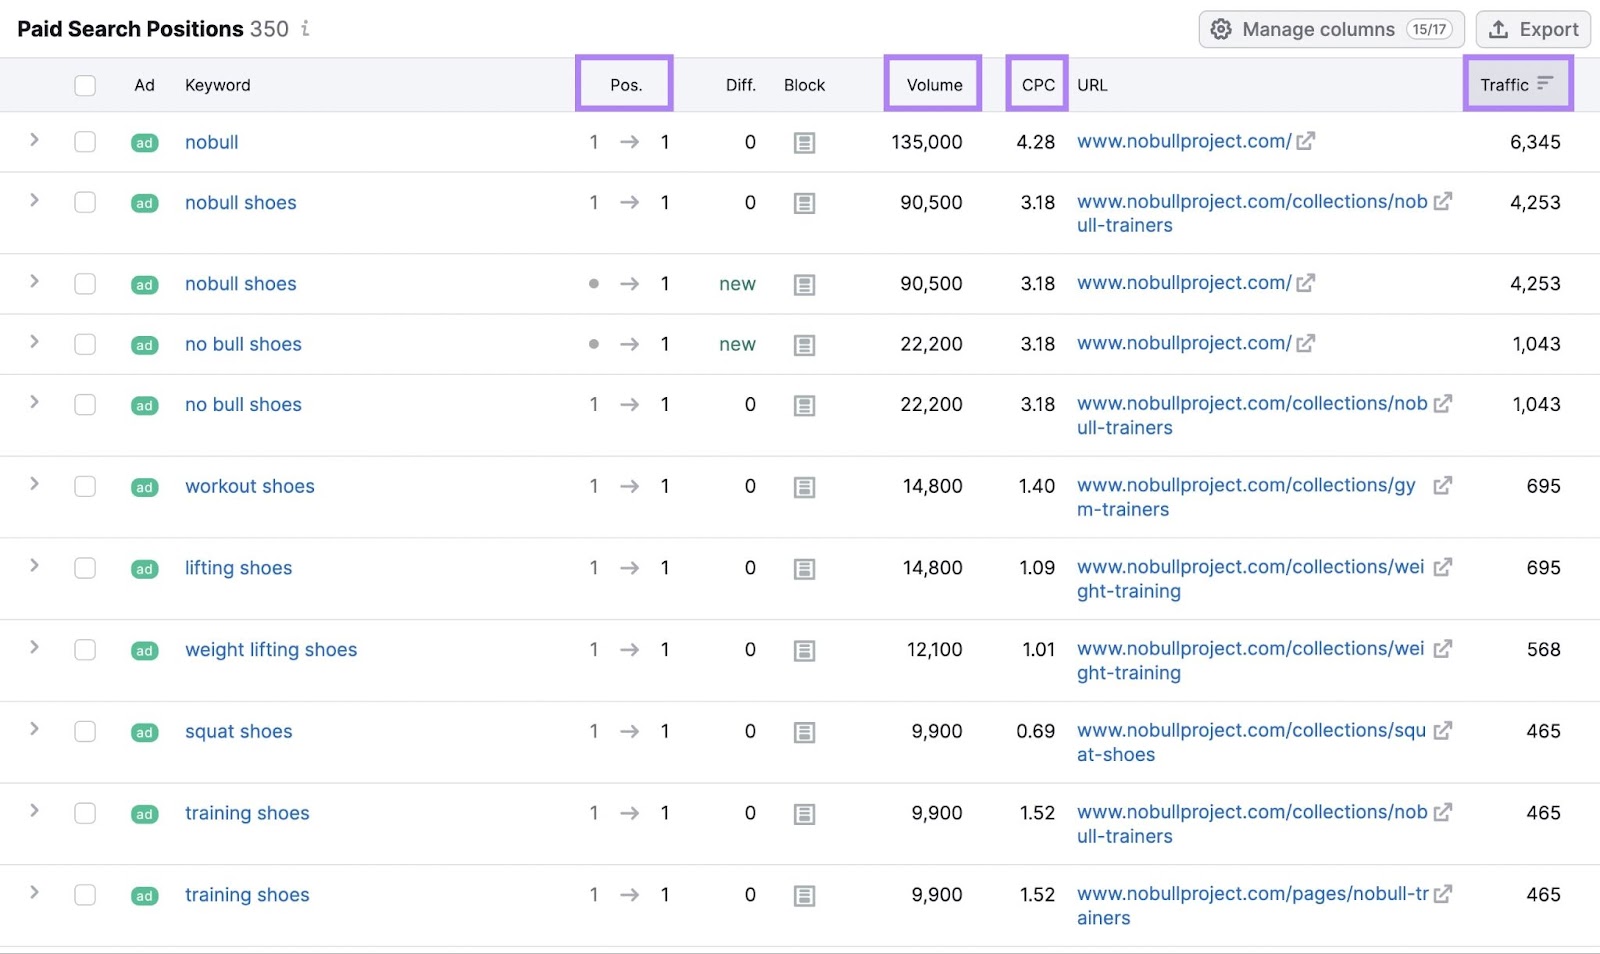 Paid Search Positions table showing nobullproject.com data